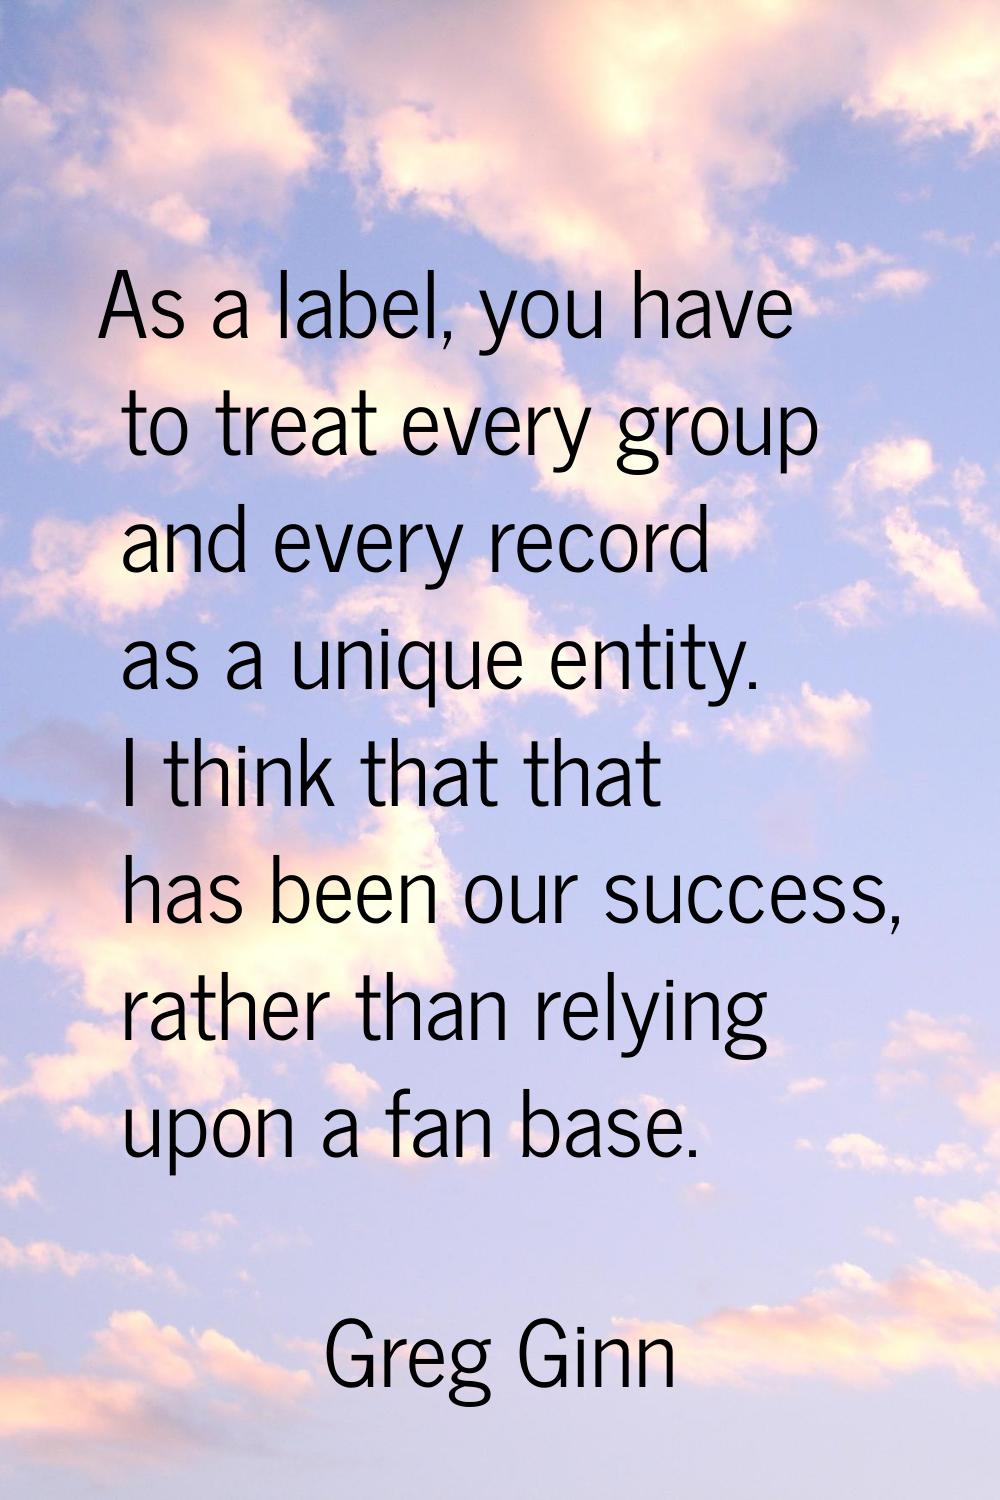 As a label, you have to treat every group and every record as a unique entity. I think that that ha